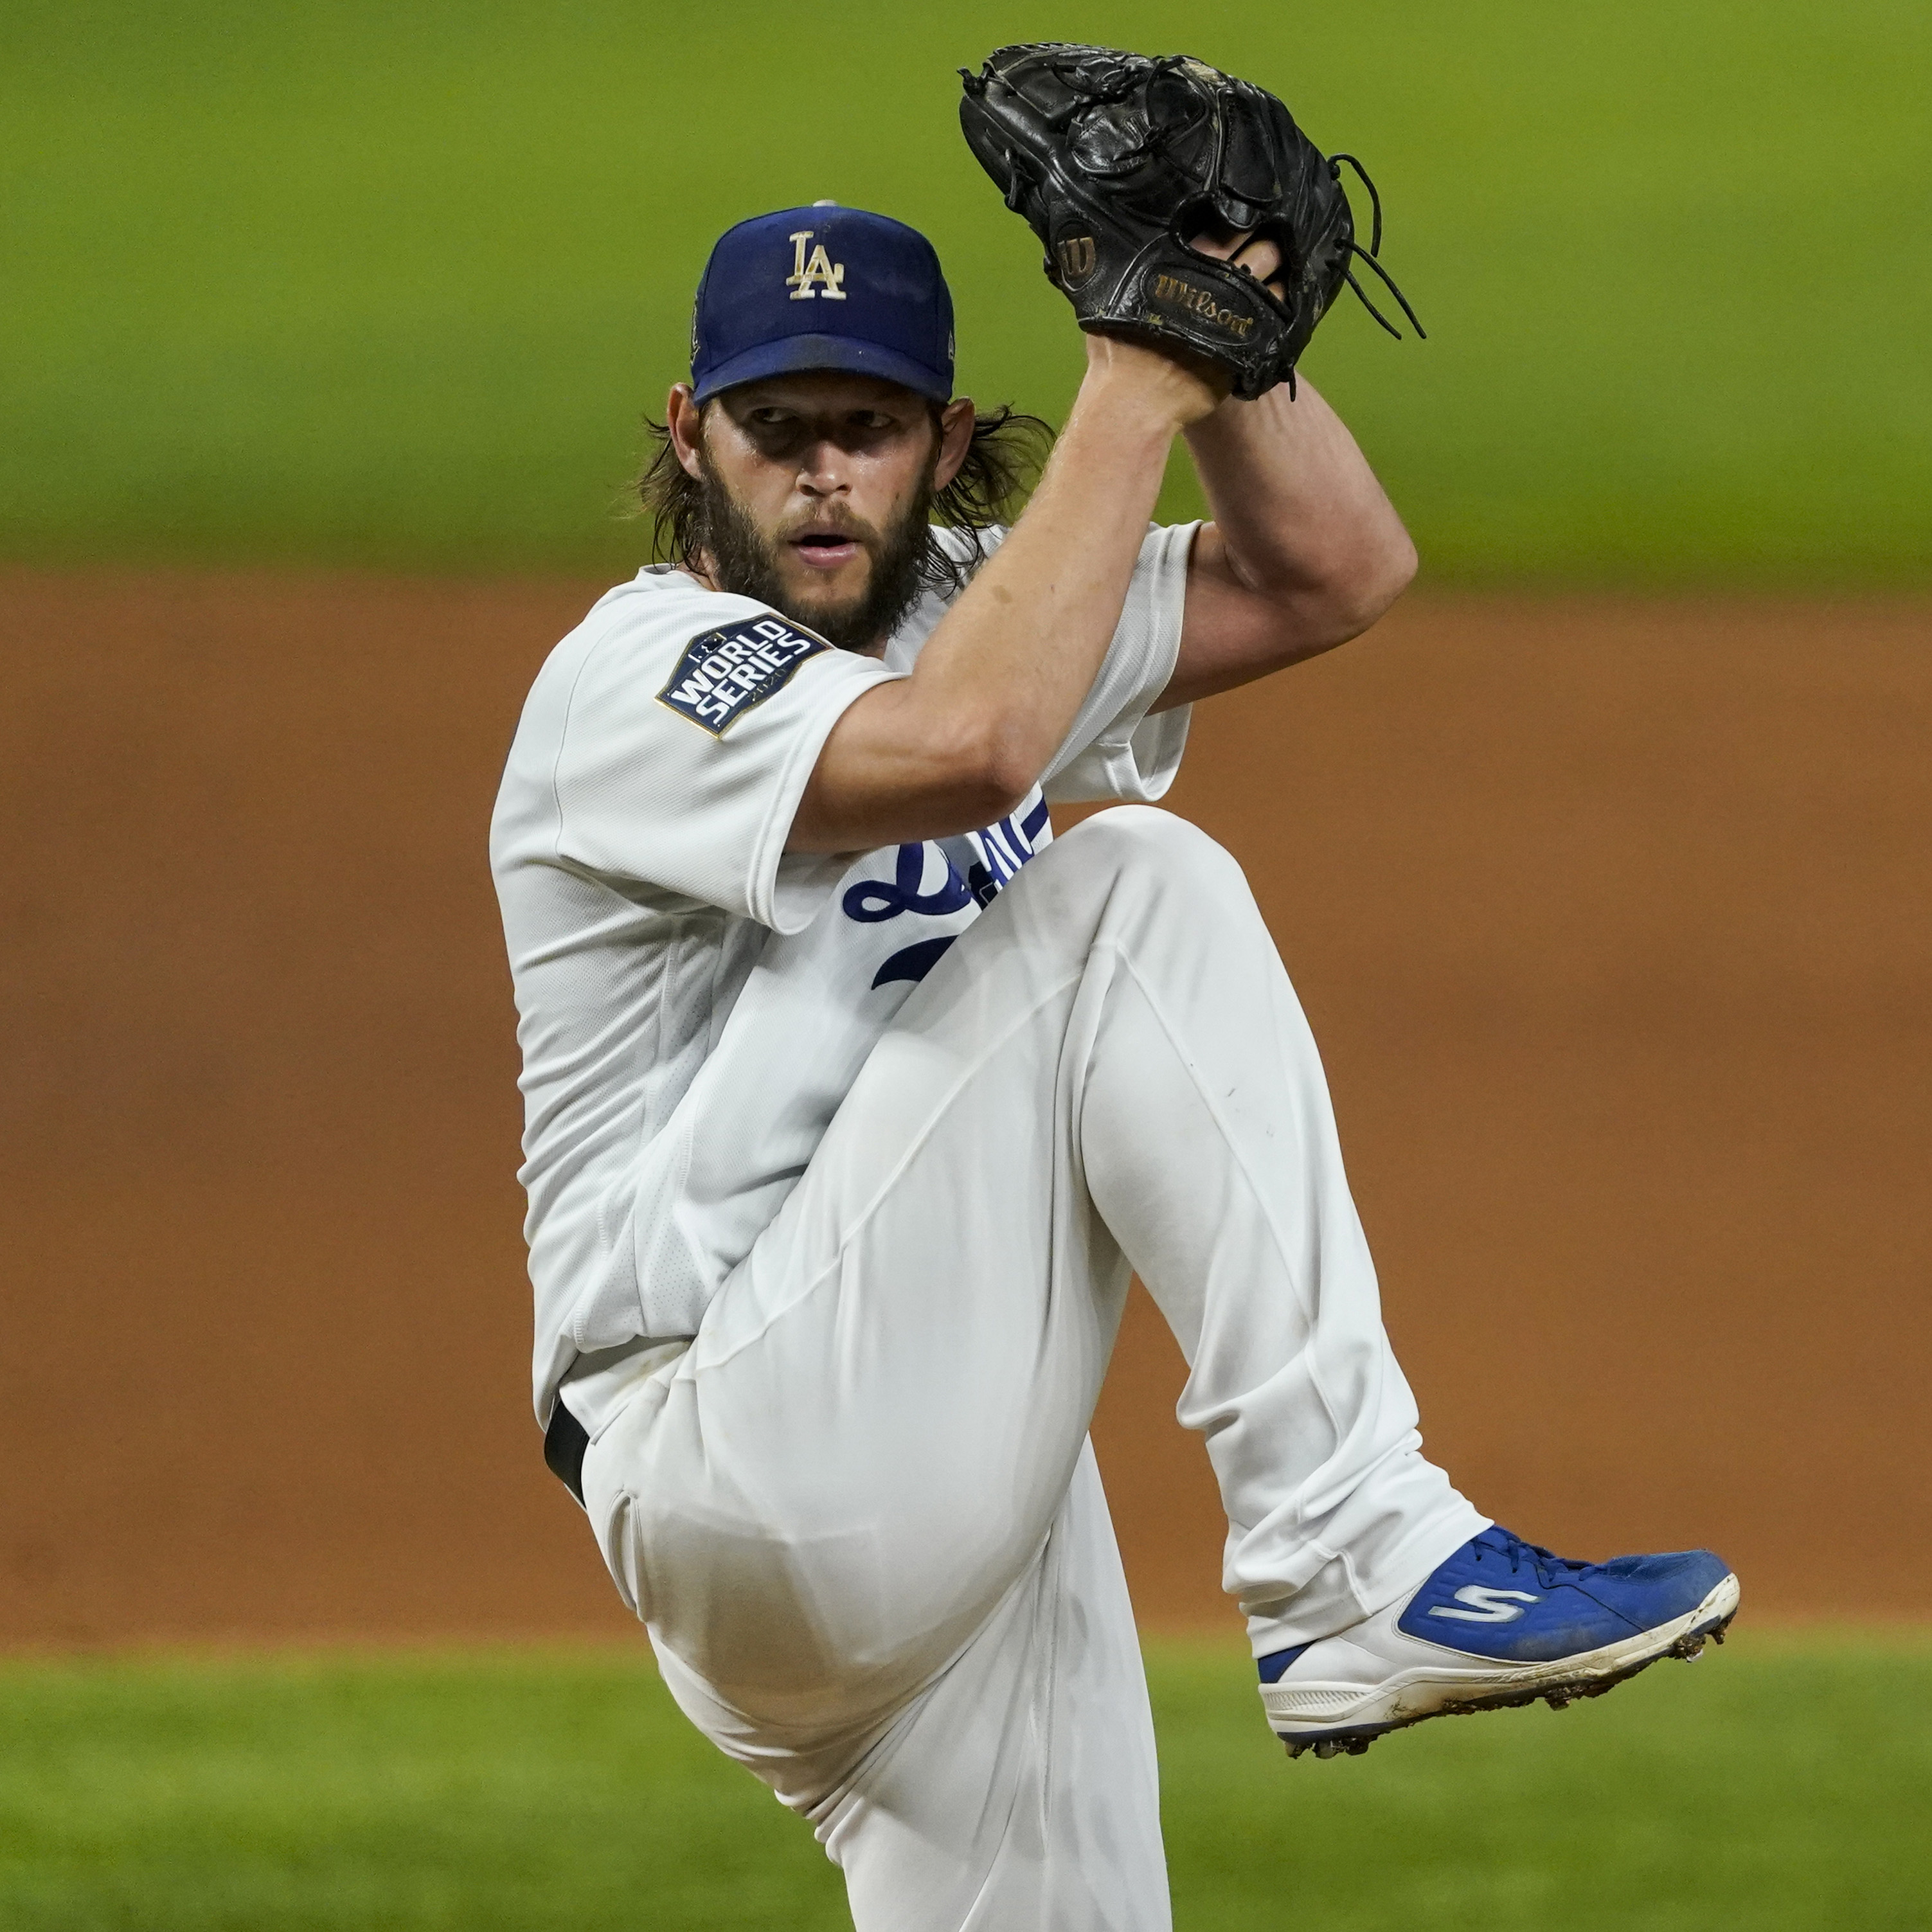 Maybe Clayton Kershaw isn't as bad in the postseason as we all